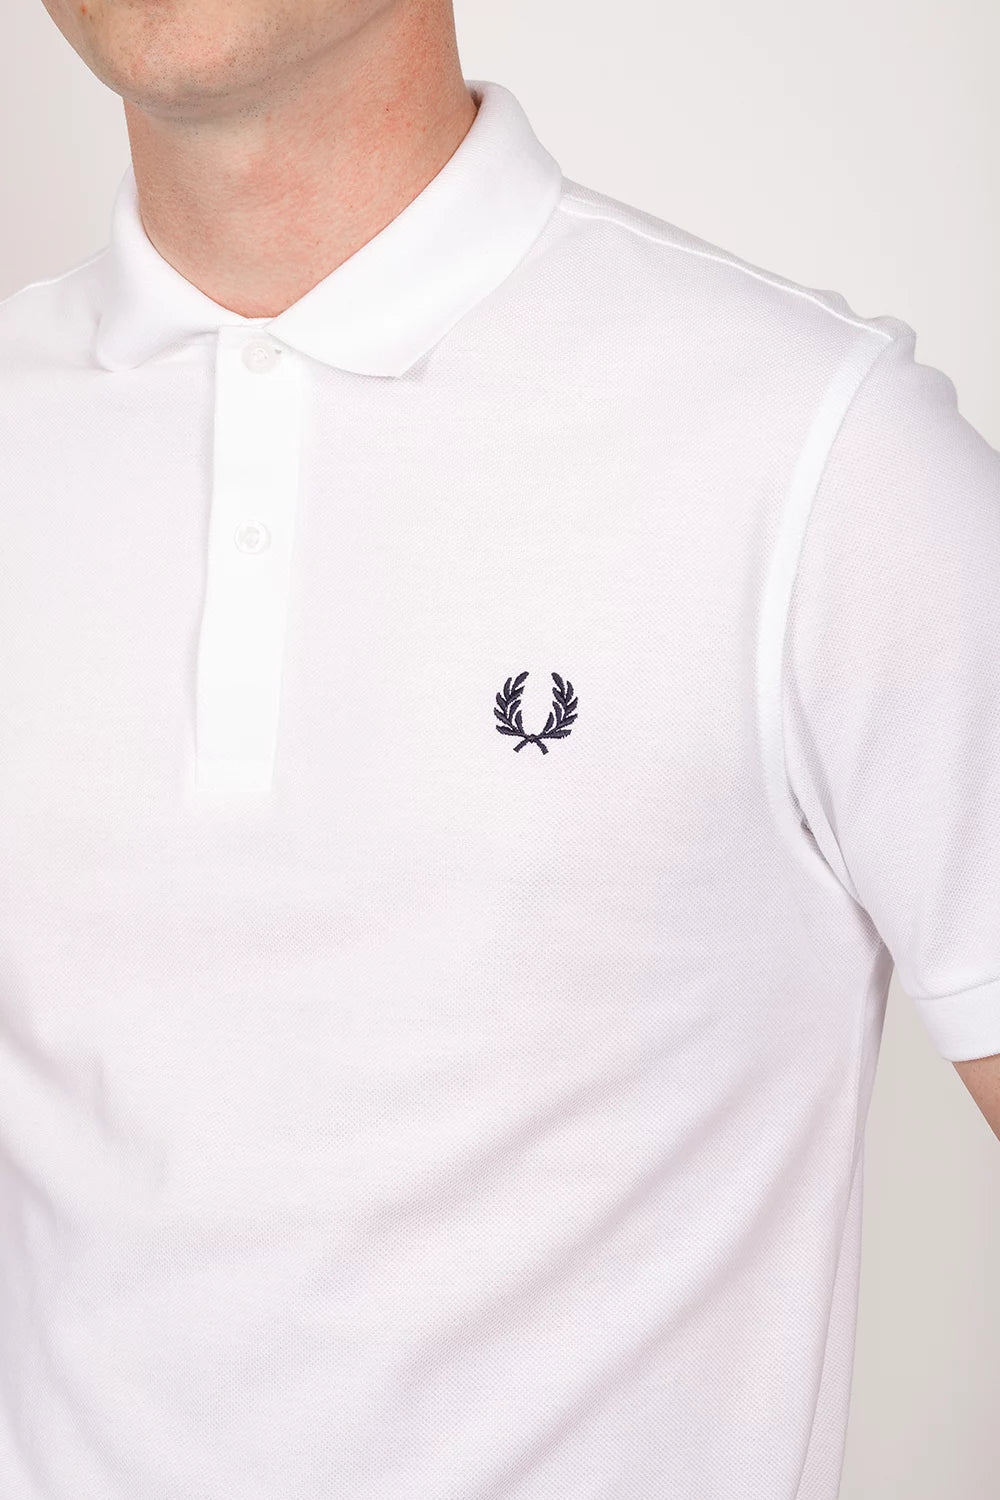 Tennis Shirt Polos Fred Perry   